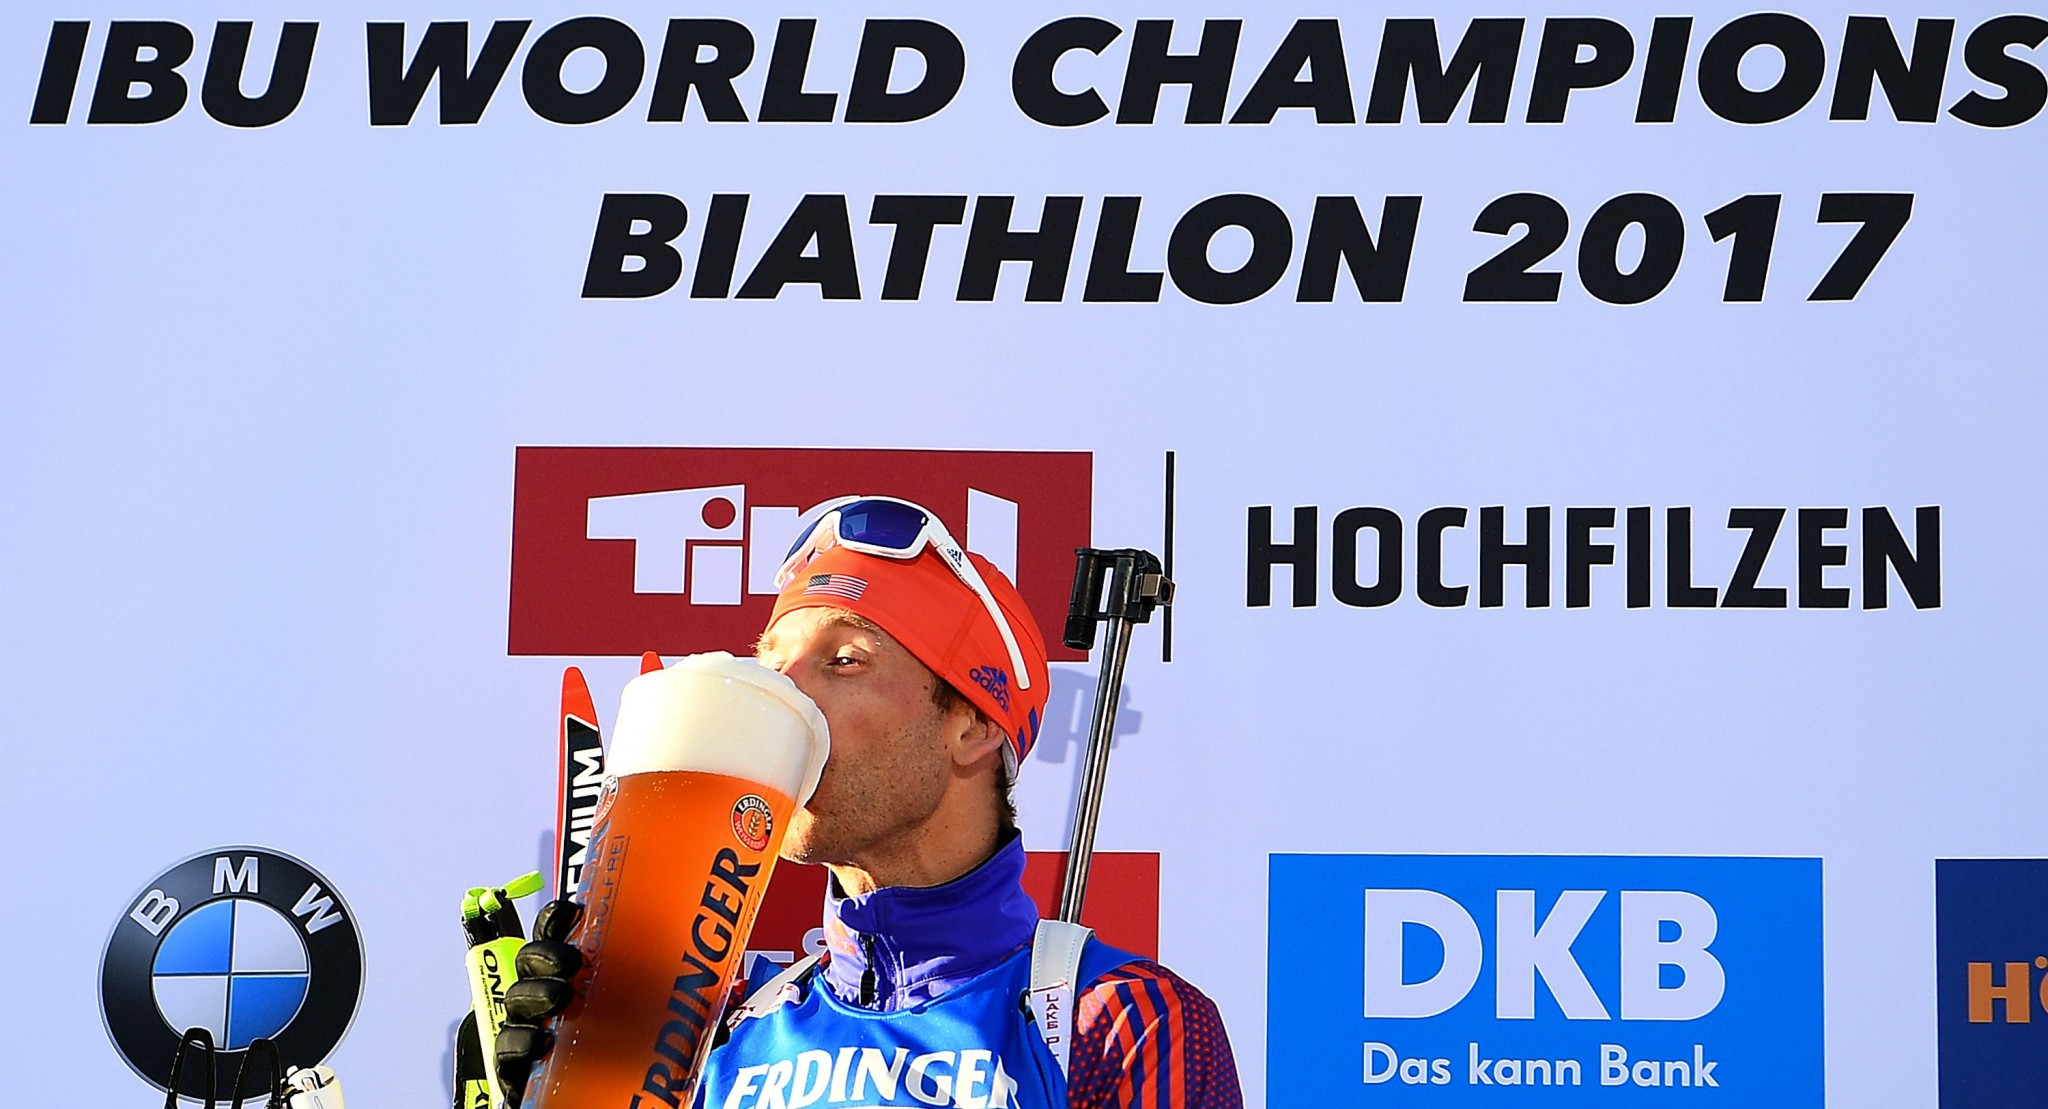 Lowell Bailey made history as the first American winner of IBU World Championship gold ©Getty Images